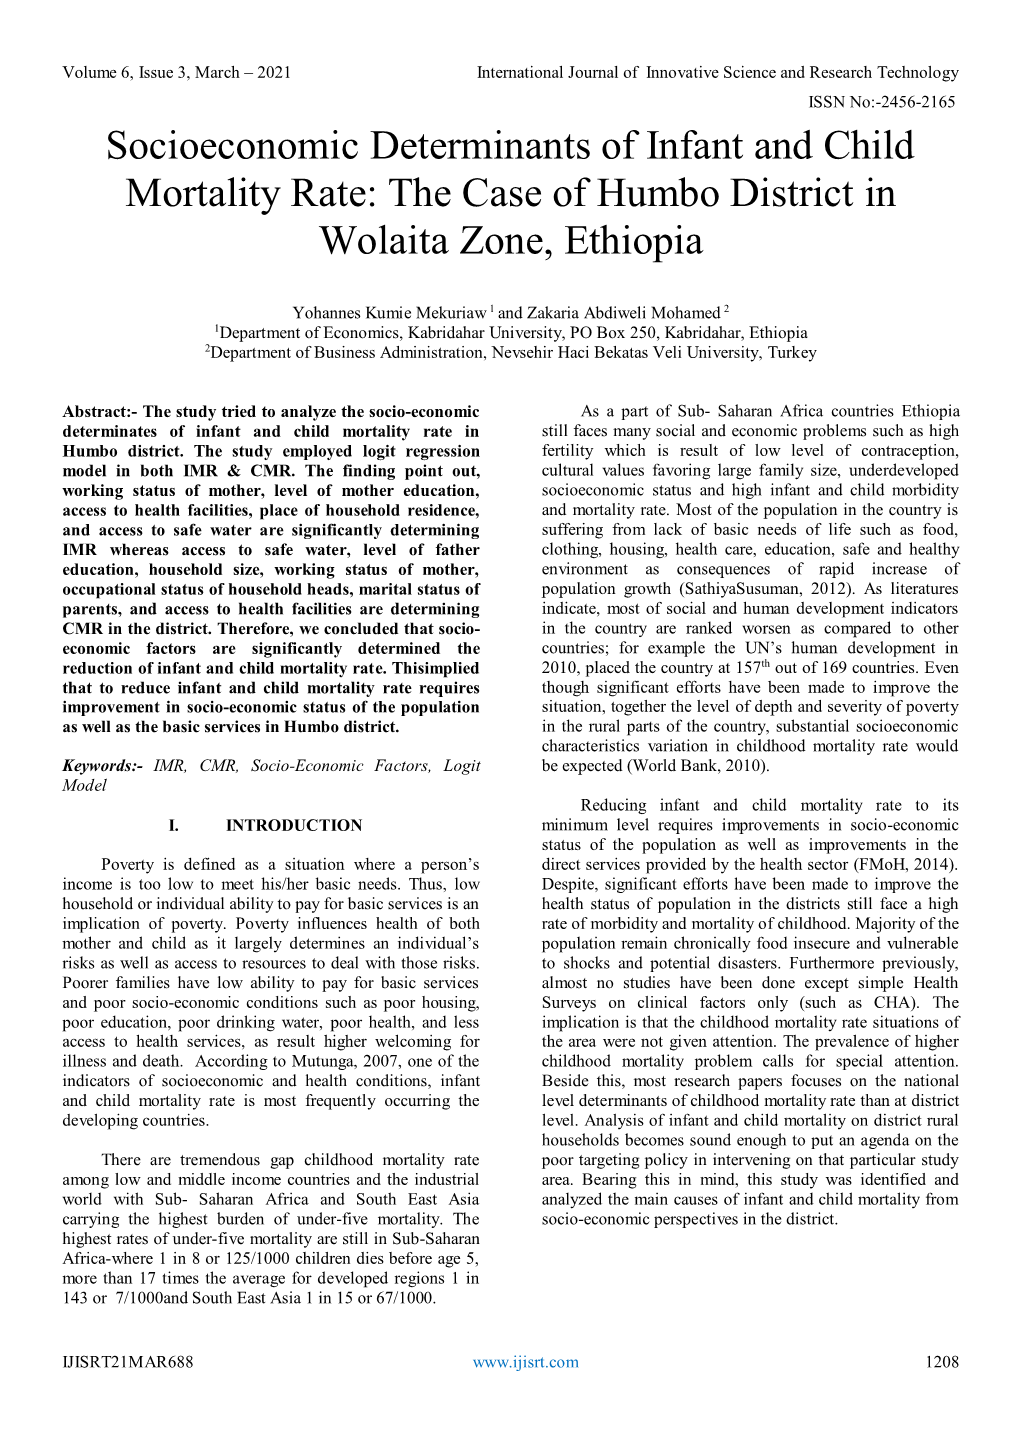 Socioeconomic Determinants of Infant and Child Mortality Rate: the Case of Humbo District in Wolaita Zone, Ethiopia